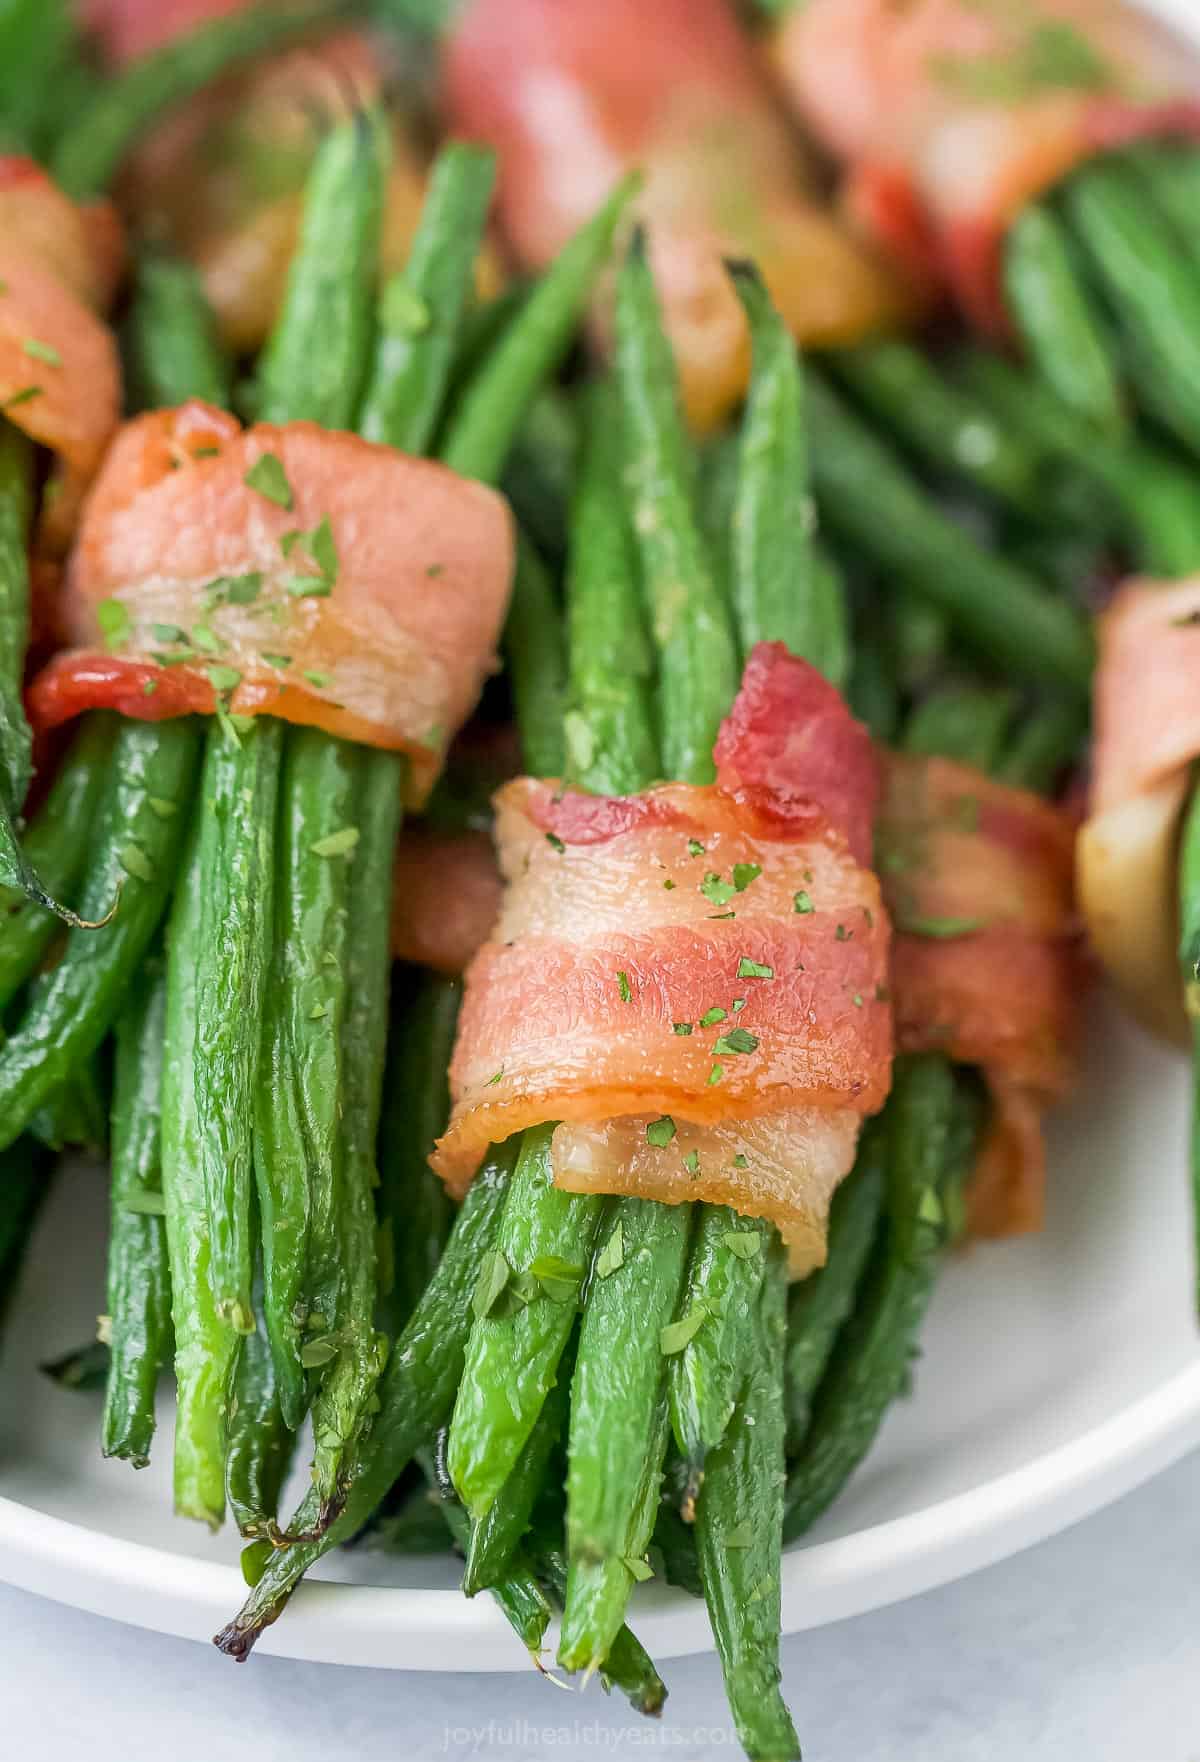 A close-up shot of a bundle of baked green beans wrapped inside a crispy strip of bacon